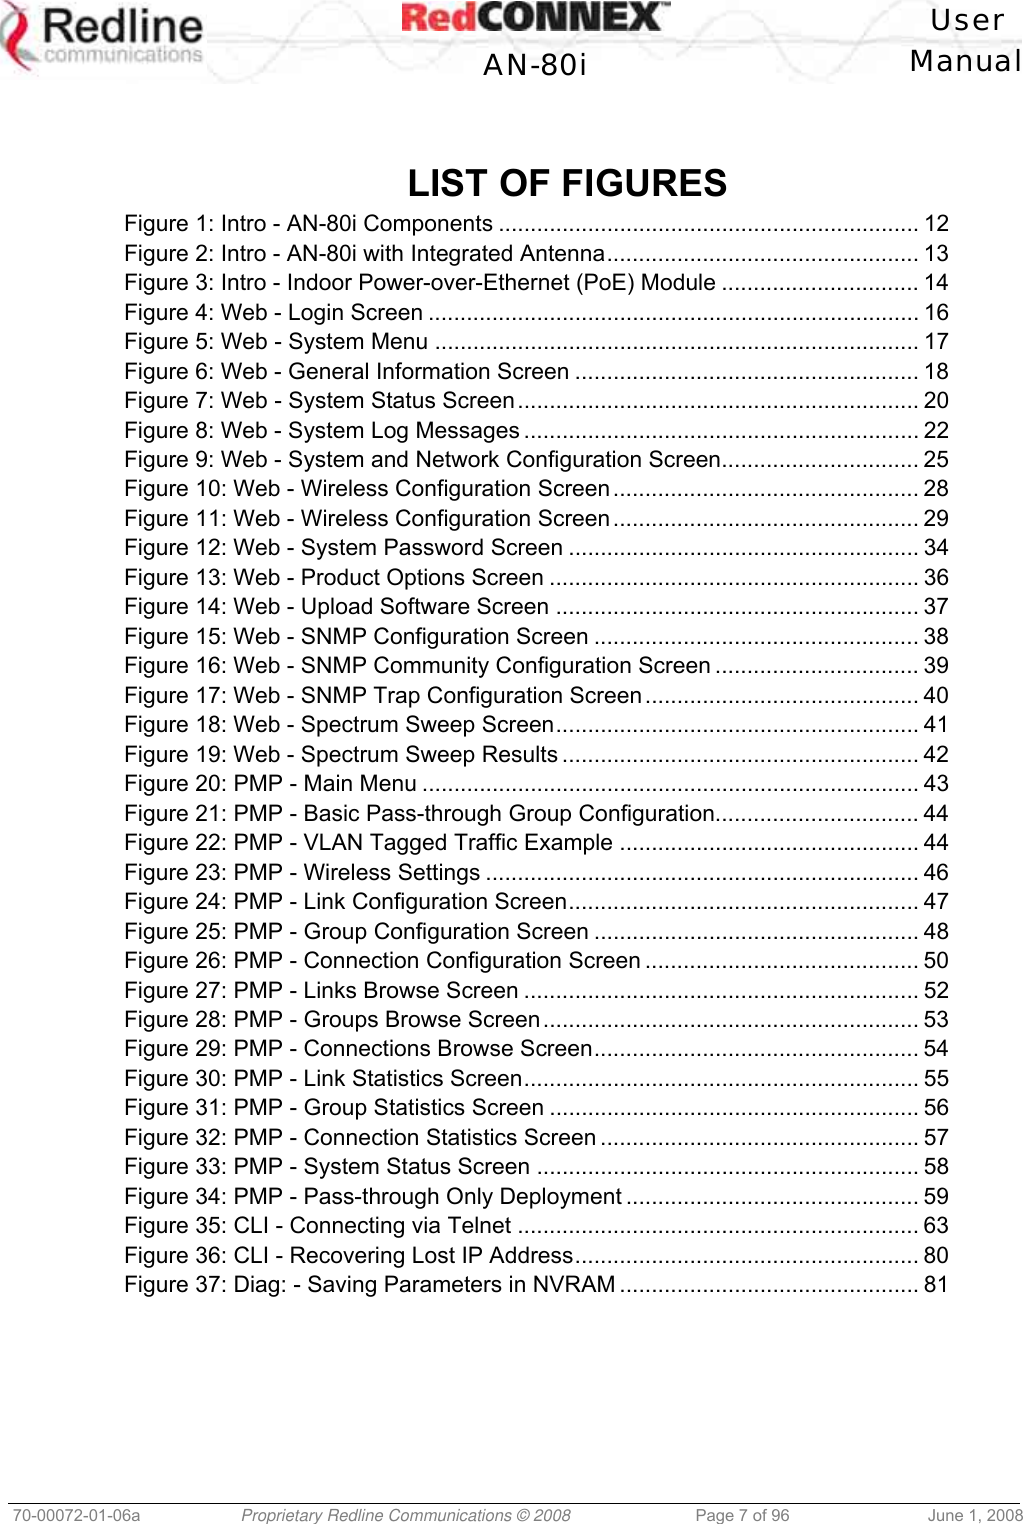   User  AN-80i Manual  70-00072-01-06a  Proprietary Redline Communications © 2008  Page 7 of 96  June 1, 2008   LIST OF FIGURES Figure 1: Intro - AN-80i Components .................................................................. 12 Figure 2: Intro - AN-80i with Integrated Antenna................................................. 13 Figure 3: Intro - Indoor Power-over-Ethernet (PoE) Module ............................... 14 Figure 4: Web - Login Screen ............................................................................. 16 Figure 5: Web - System Menu ............................................................................ 17 Figure 6: Web - General Information Screen ...................................................... 18 Figure 7: Web - System Status Screen............................................................... 20 Figure 8: Web - System Log Messages .............................................................. 22 Figure 9: Web - System and Network Configuration Screen............................... 25 Figure 10: Web - Wireless Configuration Screen................................................ 28 Figure 11: Web - Wireless Configuration Screen................................................ 29 Figure 12: Web - System Password Screen ....................................................... 34 Figure 13: Web - Product Options Screen .......................................................... 36 Figure 14: Web - Upload Software Screen ......................................................... 37 Figure 15: Web - SNMP Configuration Screen ................................................... 38 Figure 16: Web - SNMP Community Configuration Screen ................................ 39 Figure 17: Web - SNMP Trap Configuration Screen........................................... 40 Figure 18: Web - Spectrum Sweep Screen......................................................... 41 Figure 19: Web - Spectrum Sweep Results ........................................................ 42 Figure 20: PMP - Main Menu .............................................................................. 43 Figure 21: PMP - Basic Pass-through Group Configuration................................ 44 Figure 22: PMP - VLAN Tagged Traffic Example ............................................... 44 Figure 23: PMP - Wireless Settings .................................................................... 46 Figure 24: PMP - Link Configuration Screen....................................................... 47 Figure 25: PMP - Group Configuration Screen ................................................... 48 Figure 26: PMP - Connection Configuration Screen ........................................... 50 Figure 27: PMP - Links Browse Screen .............................................................. 52 Figure 28: PMP - Groups Browse Screen........................................................... 53 Figure 29: PMP - Connections Browse Screen................................................... 54 Figure 30: PMP - Link Statistics Screen.............................................................. 55 Figure 31: PMP - Group Statistics Screen .......................................................... 56 Figure 32: PMP - Connection Statistics Screen .................................................. 57 Figure 33: PMP - System Status Screen ............................................................ 58 Figure 34: PMP - Pass-through Only Deployment .............................................. 59 Figure 35: CLI - Connecting via Telnet ............................................................... 63 Figure 36: CLI - Recovering Lost IP Address...................................................... 80 Figure 37: Diag: - Saving Parameters in NVRAM ............................................... 81    